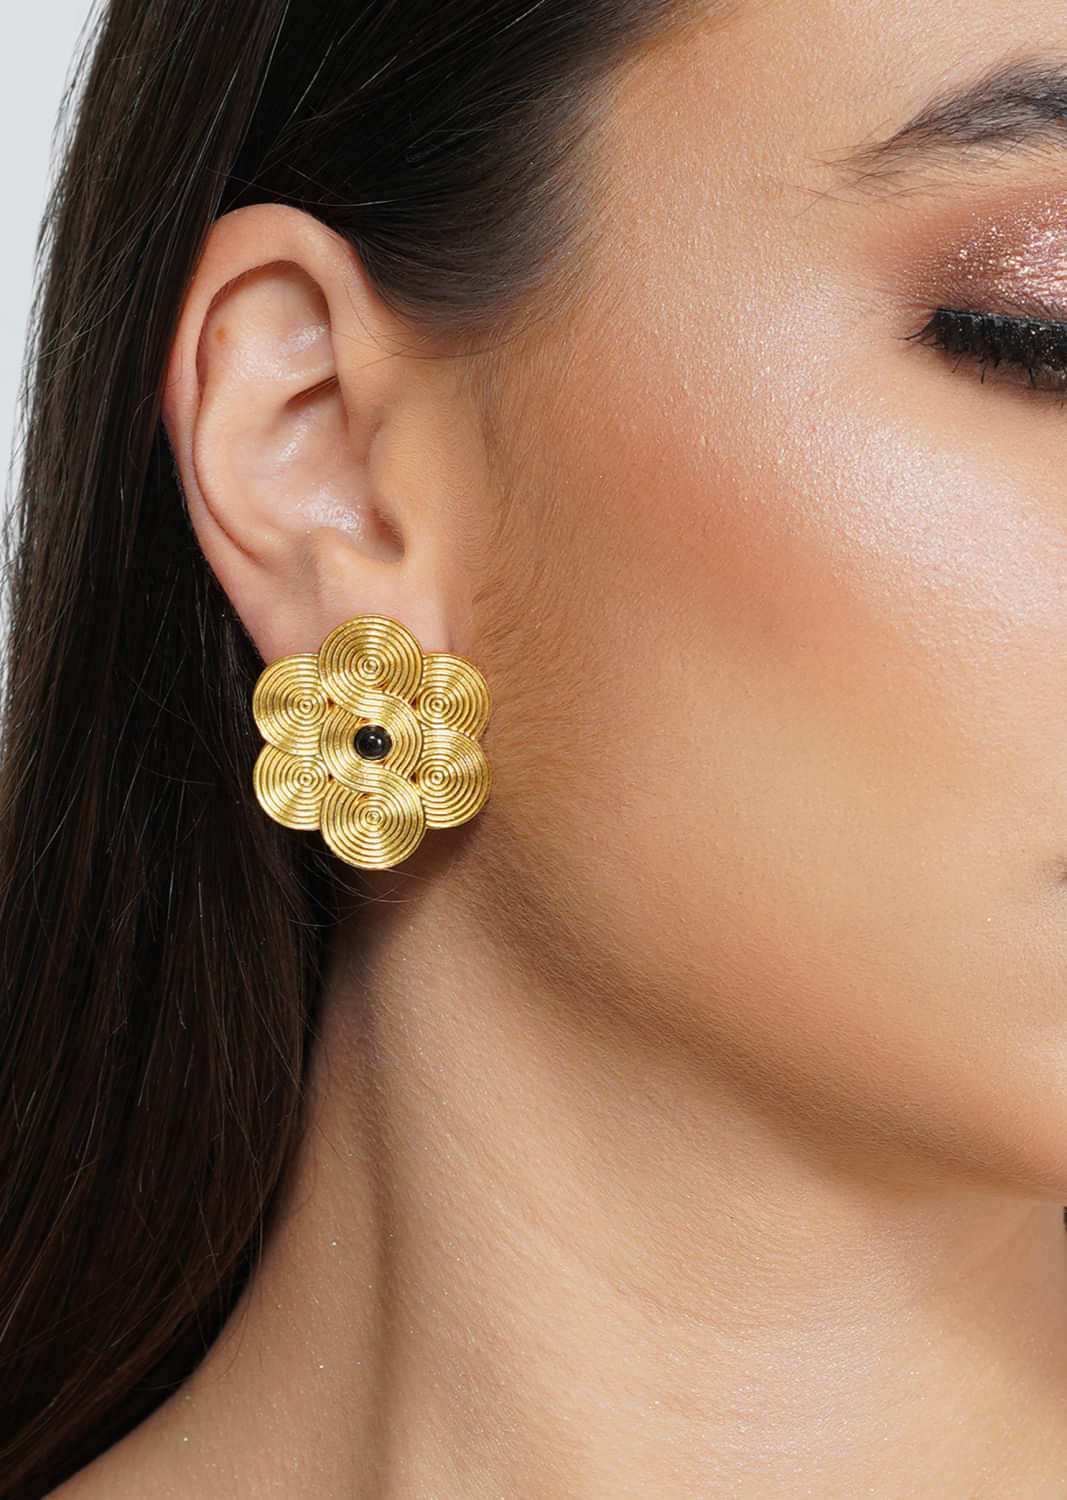 Gold Plated Stud Earrings In Floral Design Embellished With Black Onyx Stone In The Centre